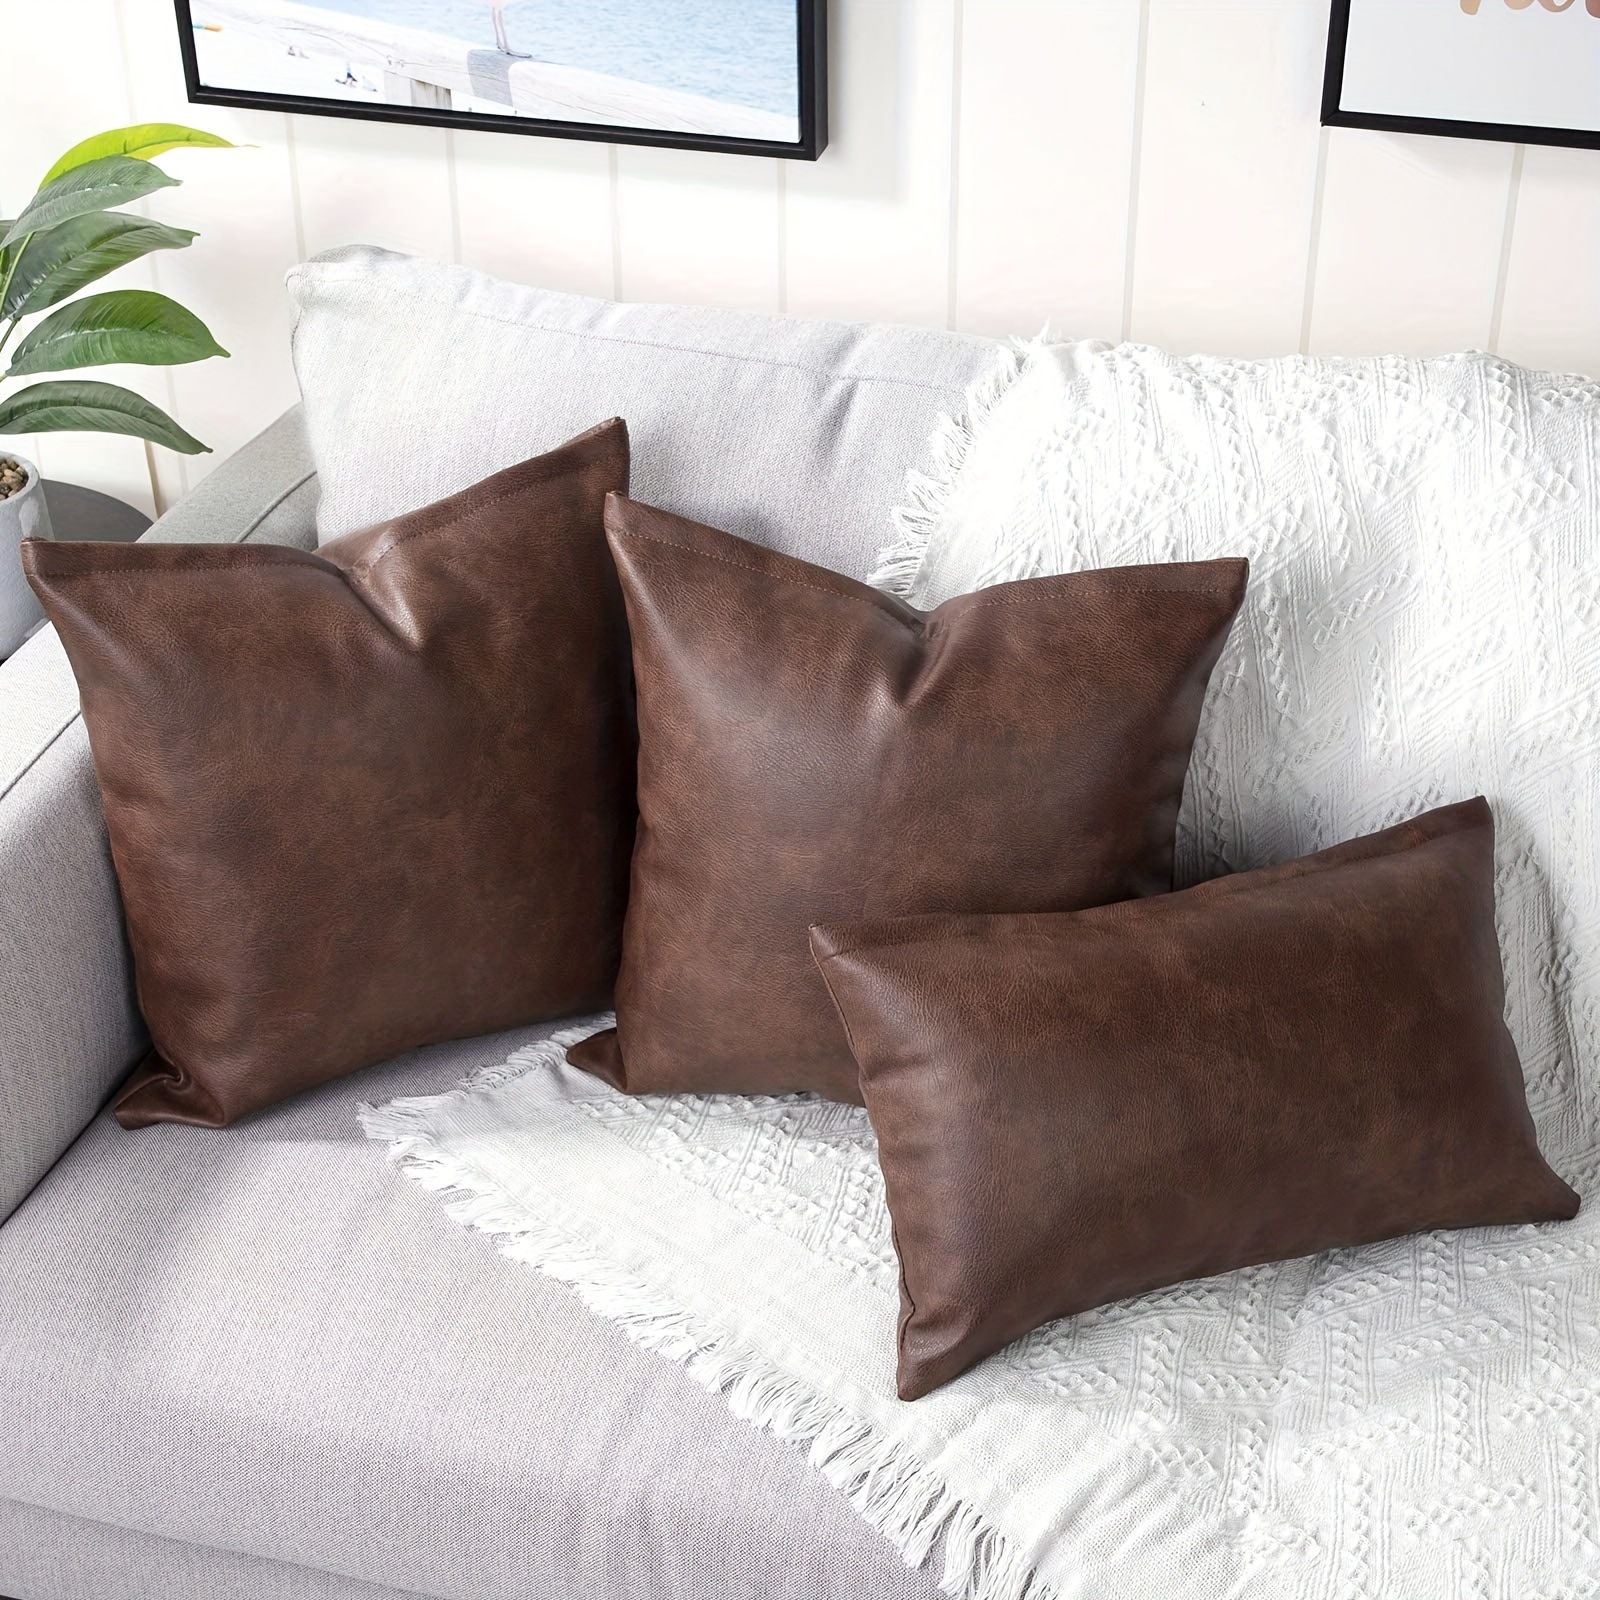 DEZENE Decorative Throw Pillow Covers: Set of 6 Modern Boho Square Cotton  and Faux Leather Pillow Cases for Home Decor Living Room Farmhouse Sofa